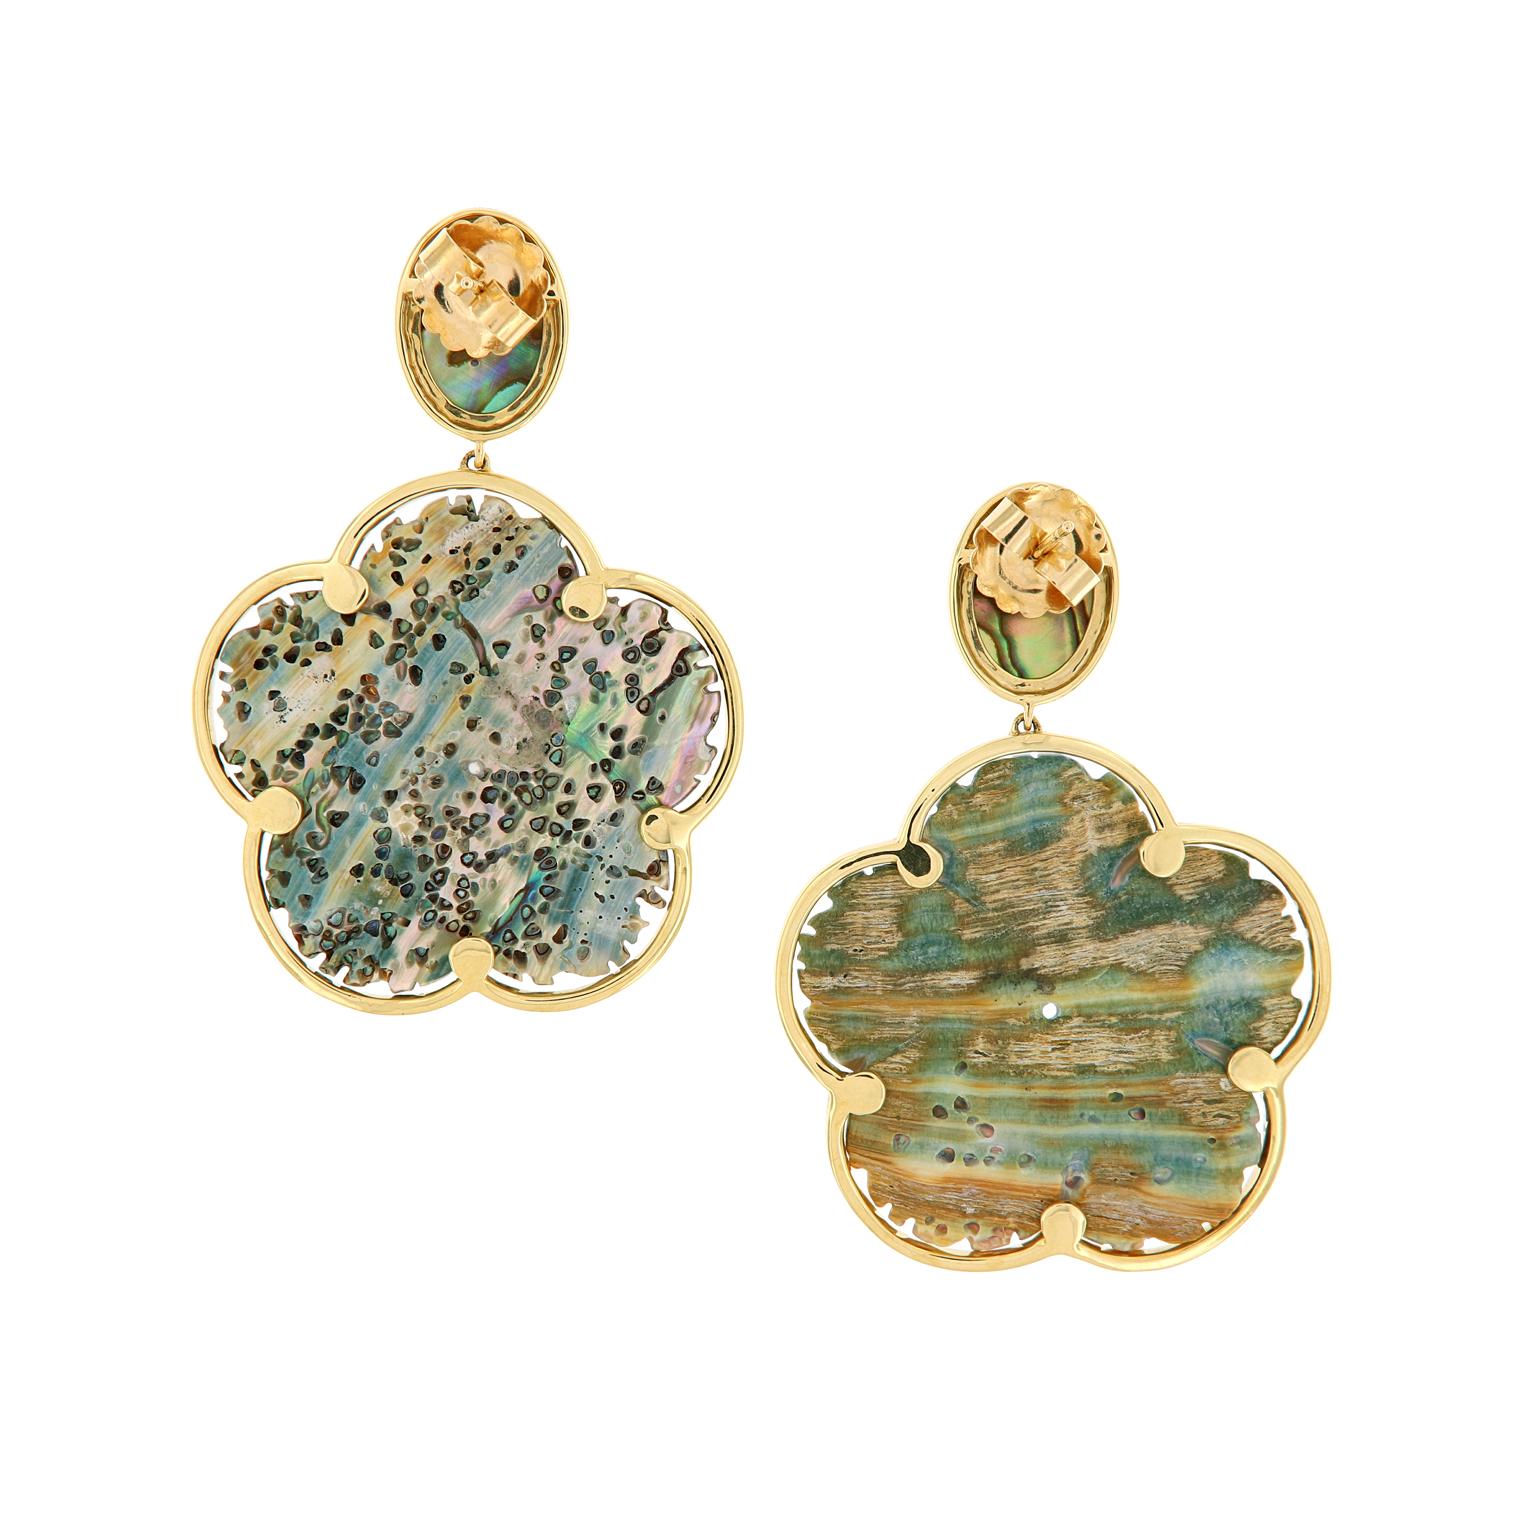 Stunning mother of pearl abalone earrings. A carved abalone flower drops from an oval cabochon abalone all encased in 18k yellow gold. Earrings are from the Innate Collection designed by Goshwara. Weigh 7.1 grams. Marked Goshwara.

Abalone 52.17 cttw